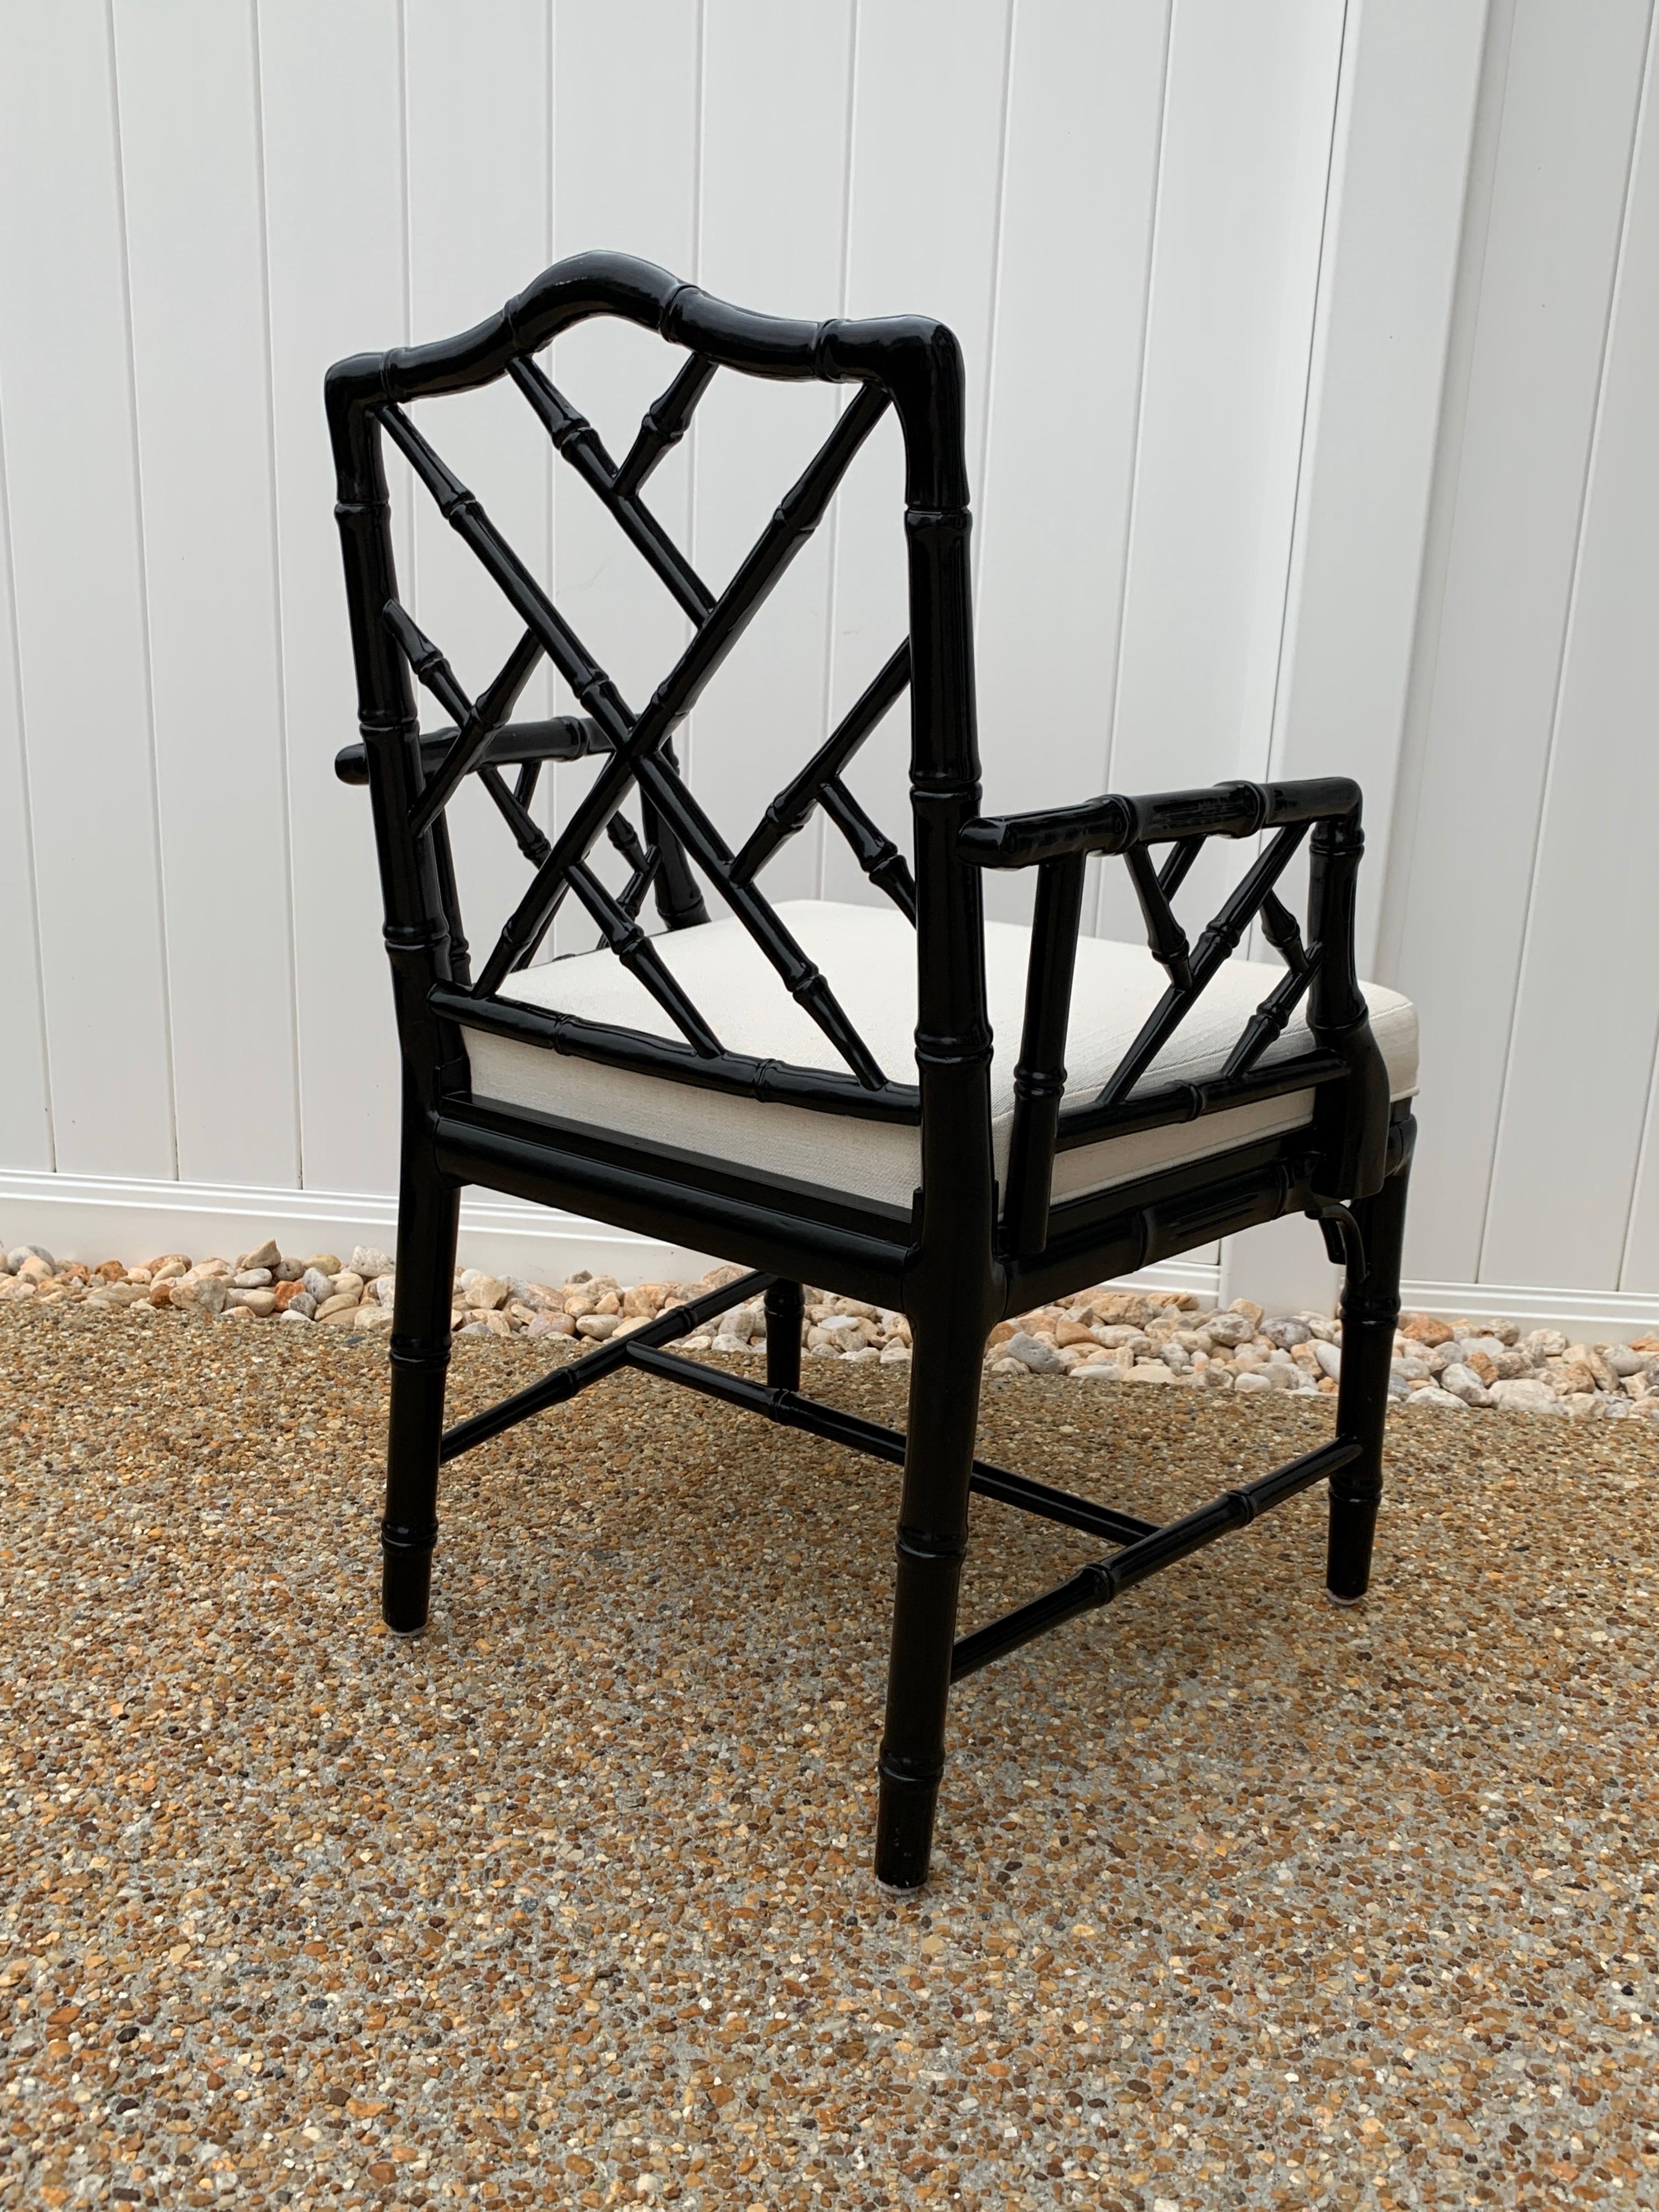 Jonathan Adler Black Lacquered Faux Bamboo Chippendale Chairs, Pair In Good Condition For Sale In Richmond, VA